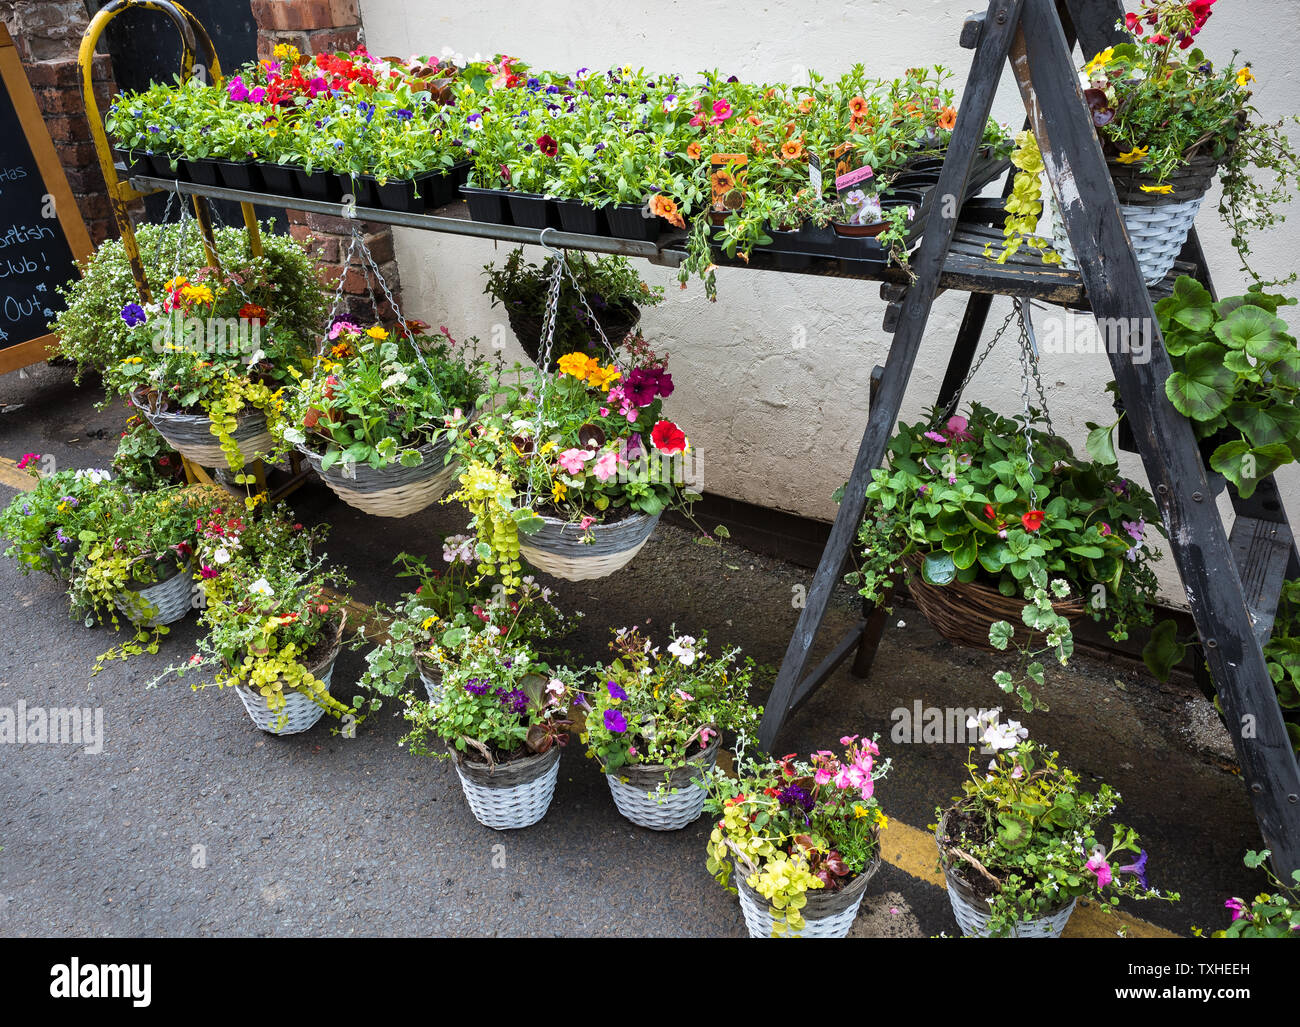 Hanging baskets for sale at an ourdoor market stall. Stock Photo